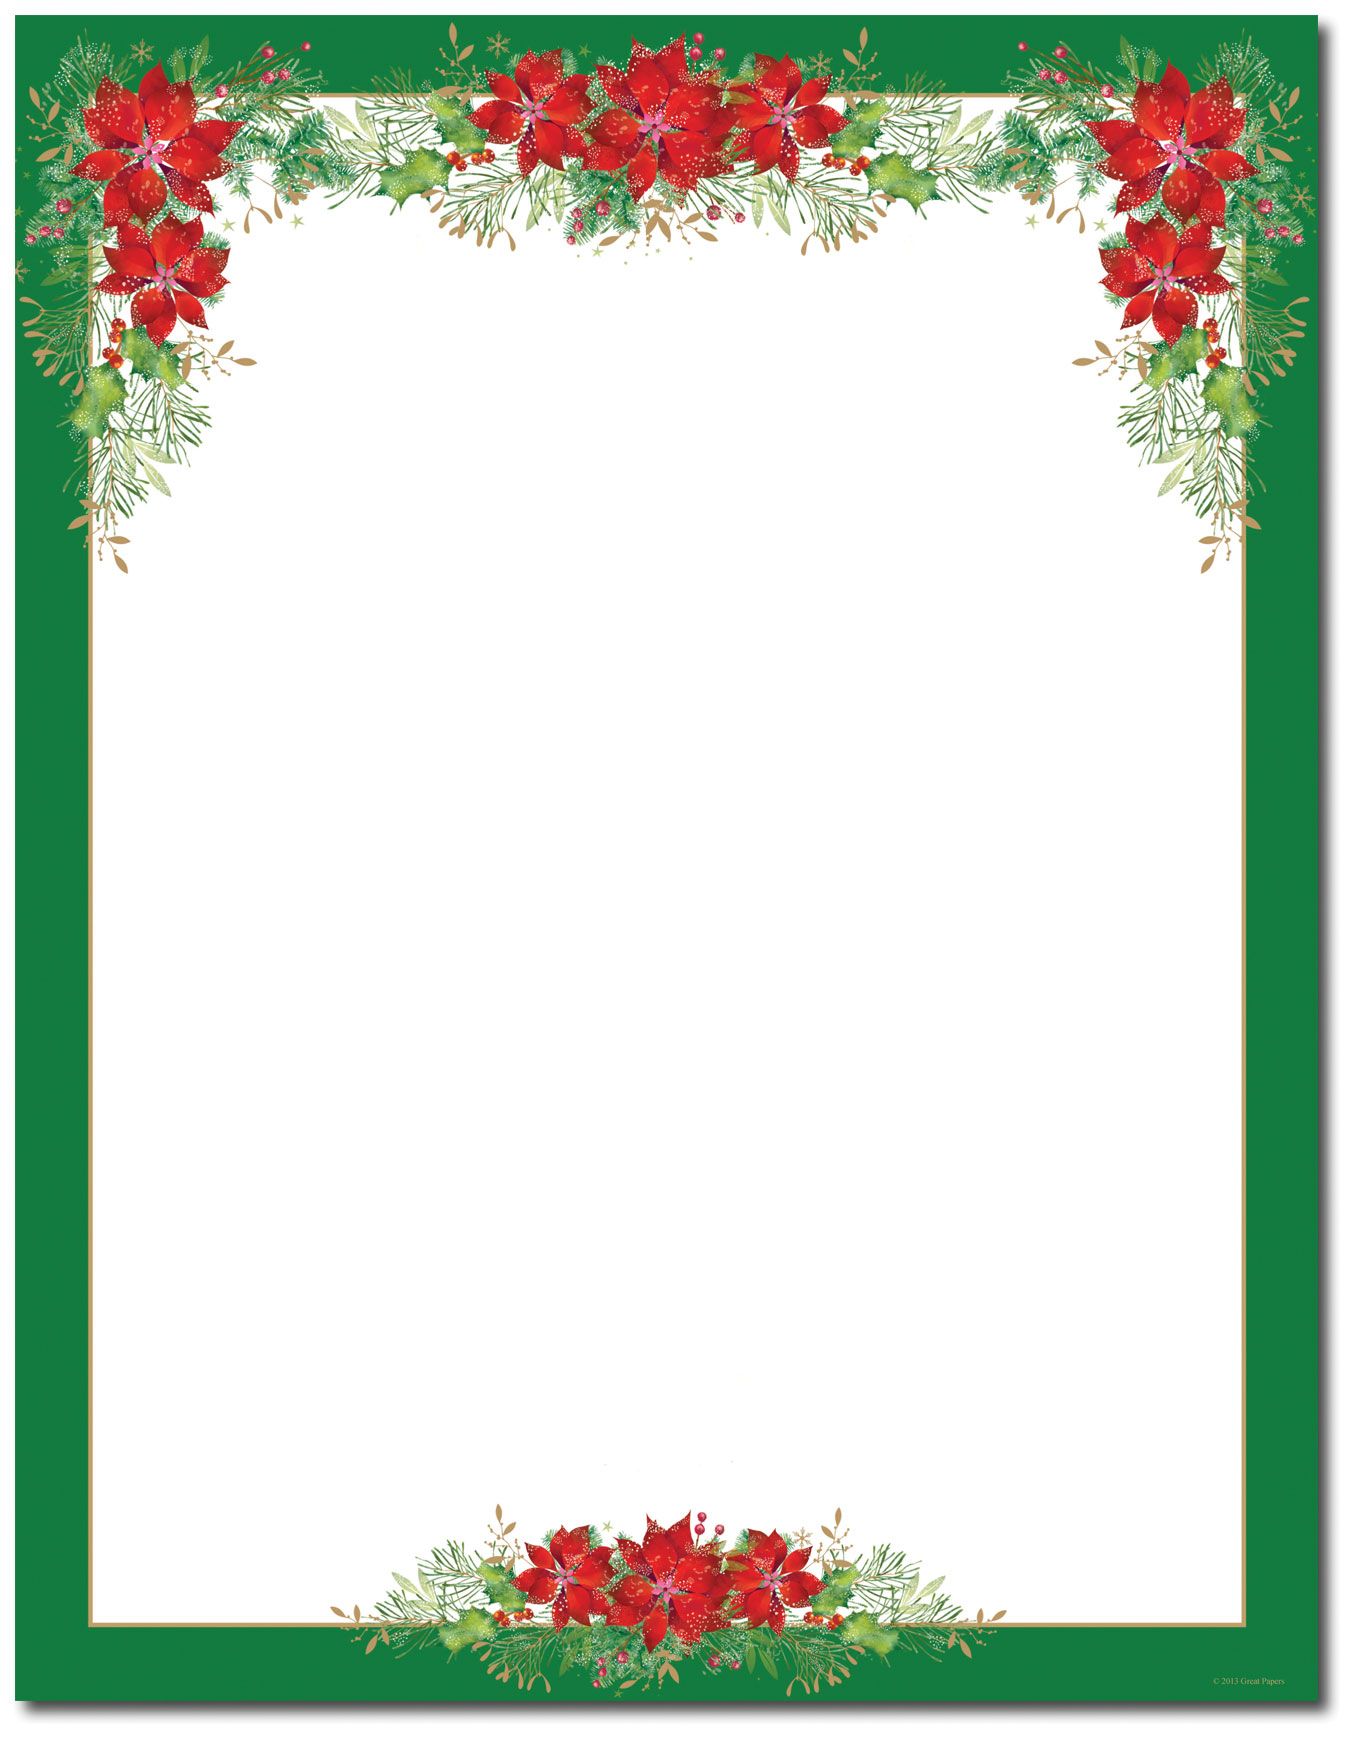 Poinsettia clipart stationary. Valance letterhead holiday papers